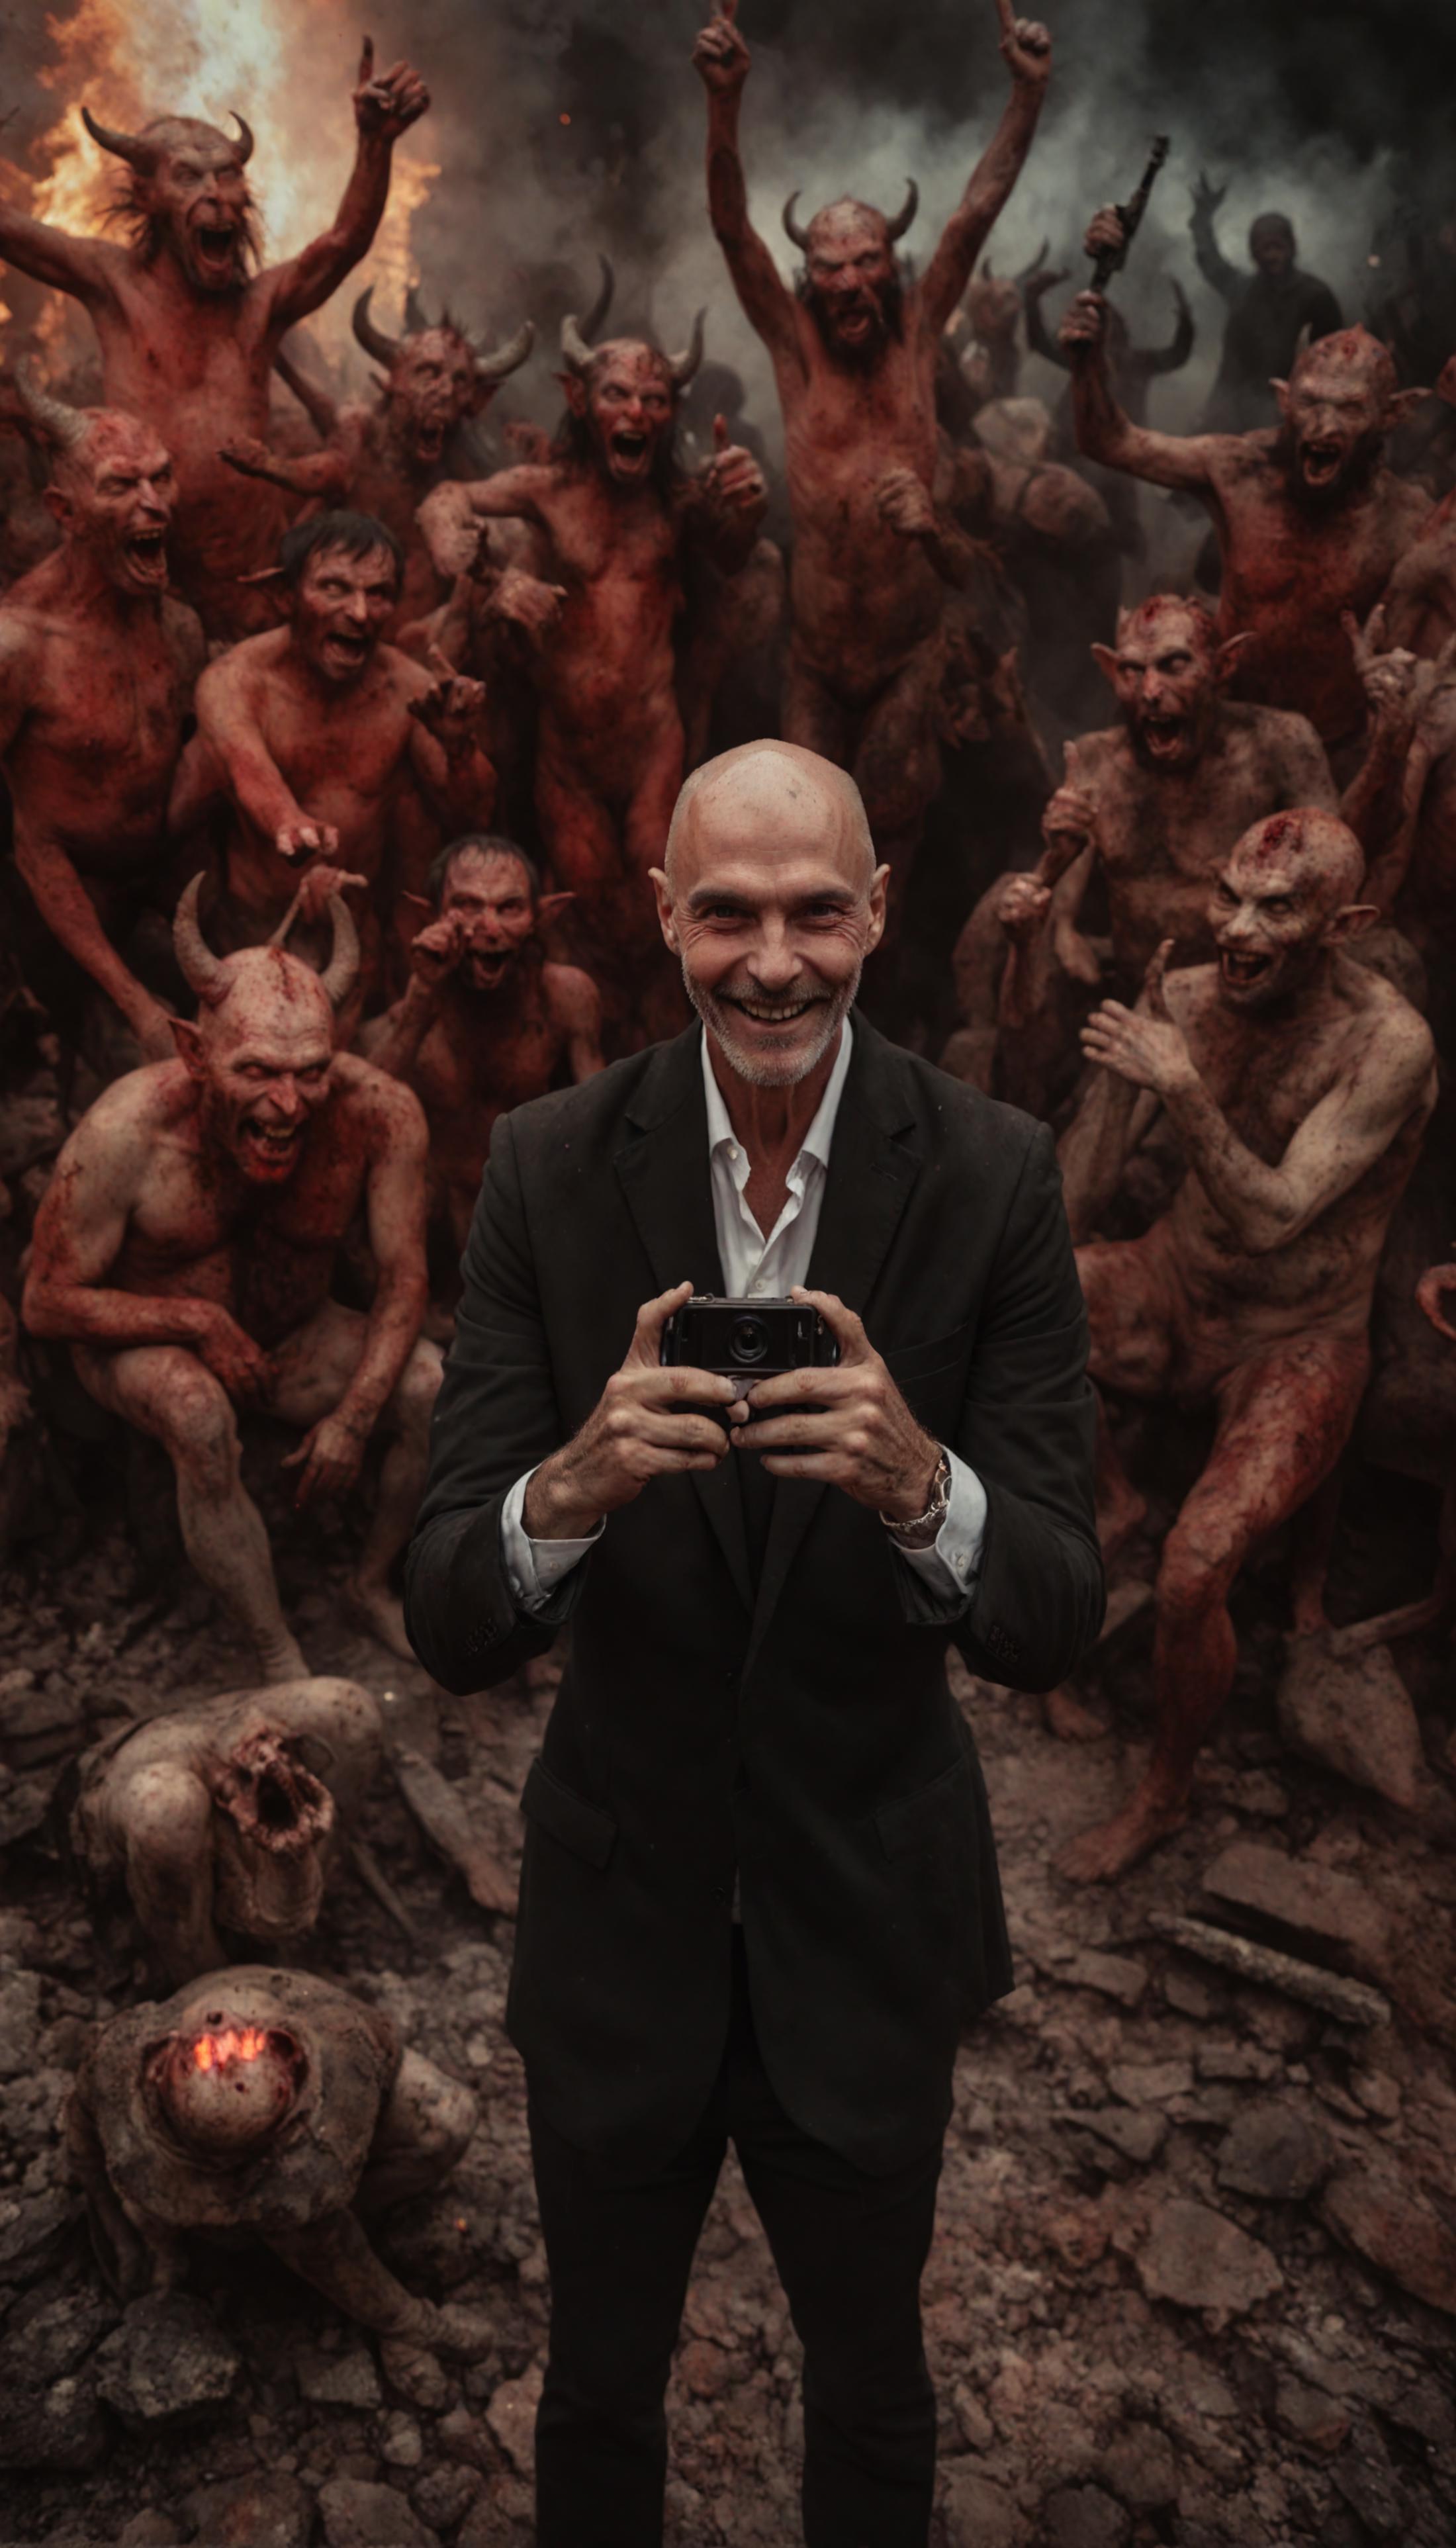 A man in a suit taking a selfie in front of a painting of demons.